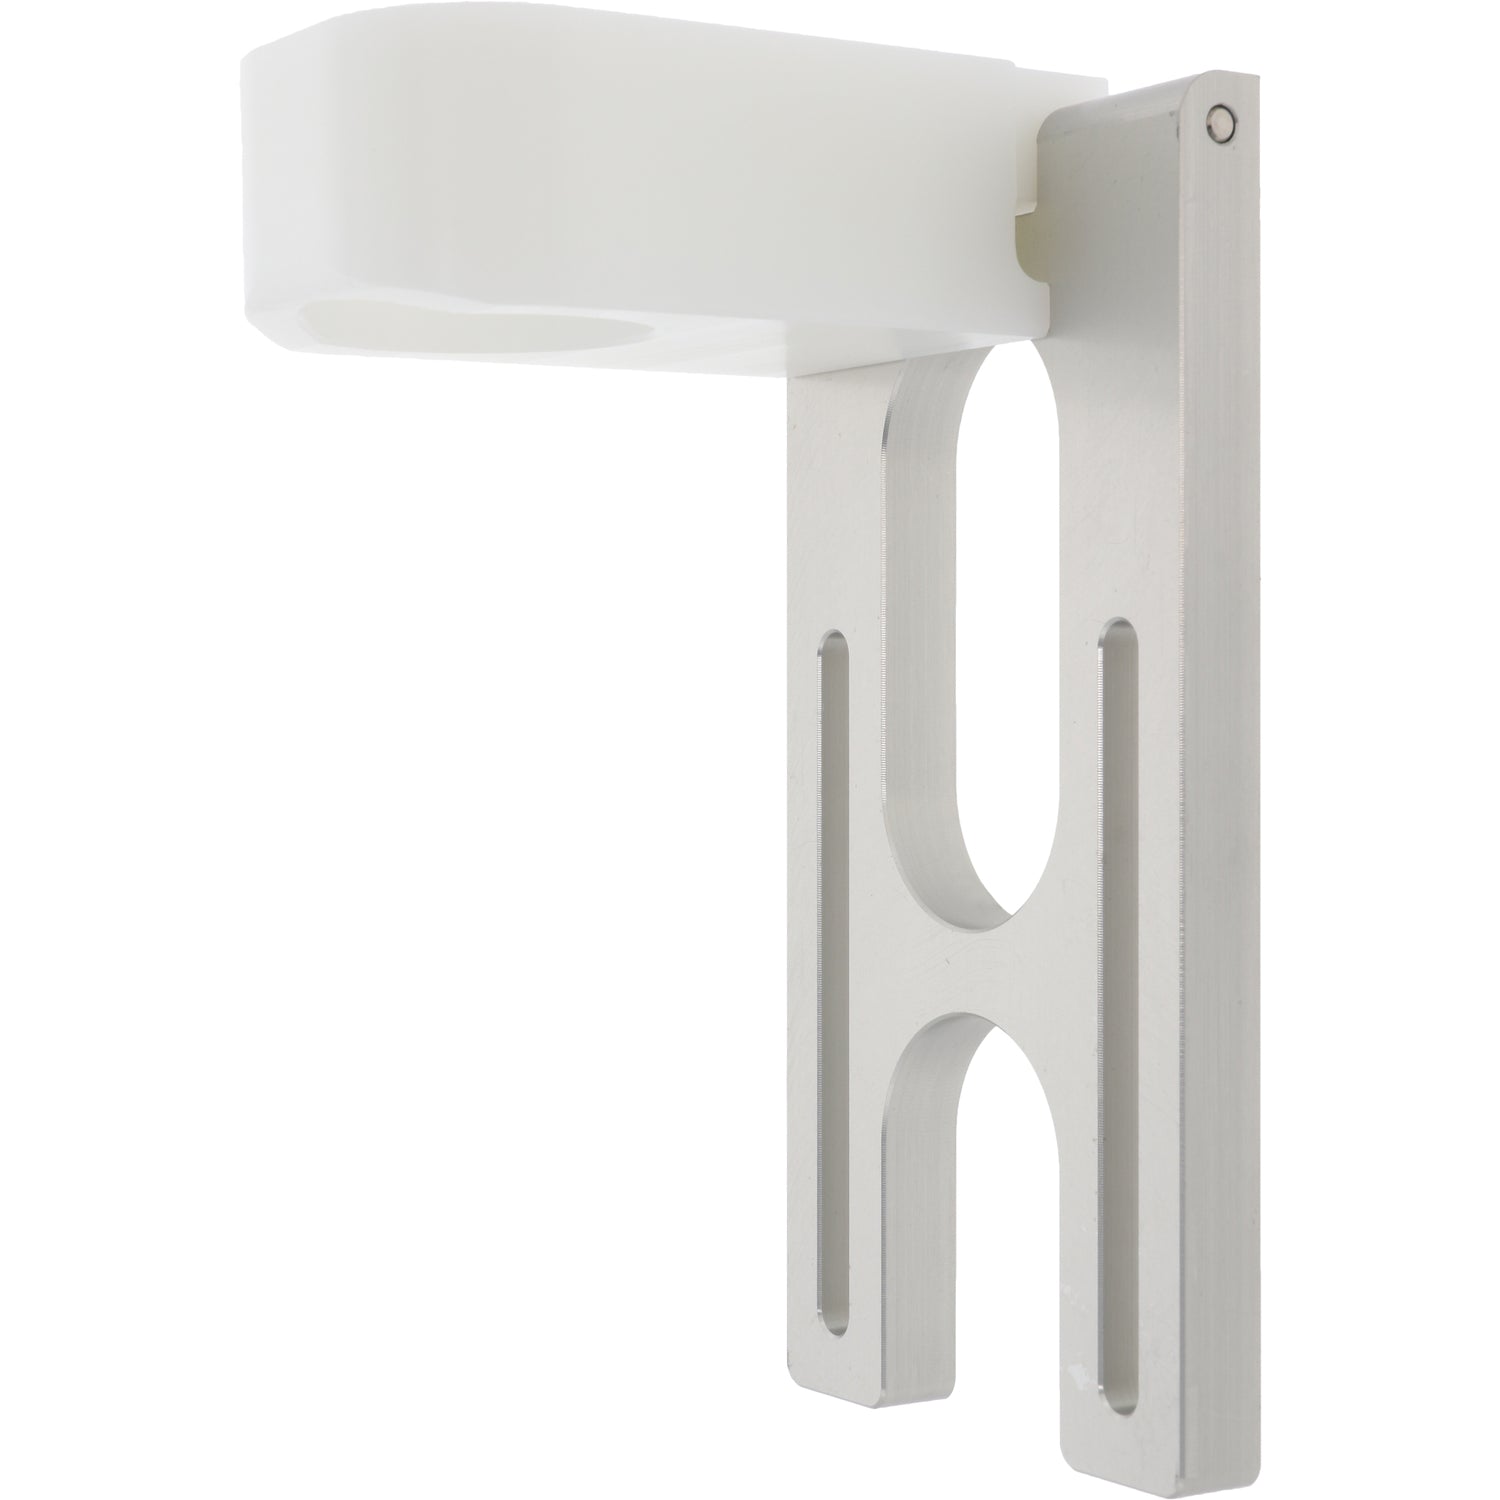 Hinged lidless can sensor mounting bracket on white background. 